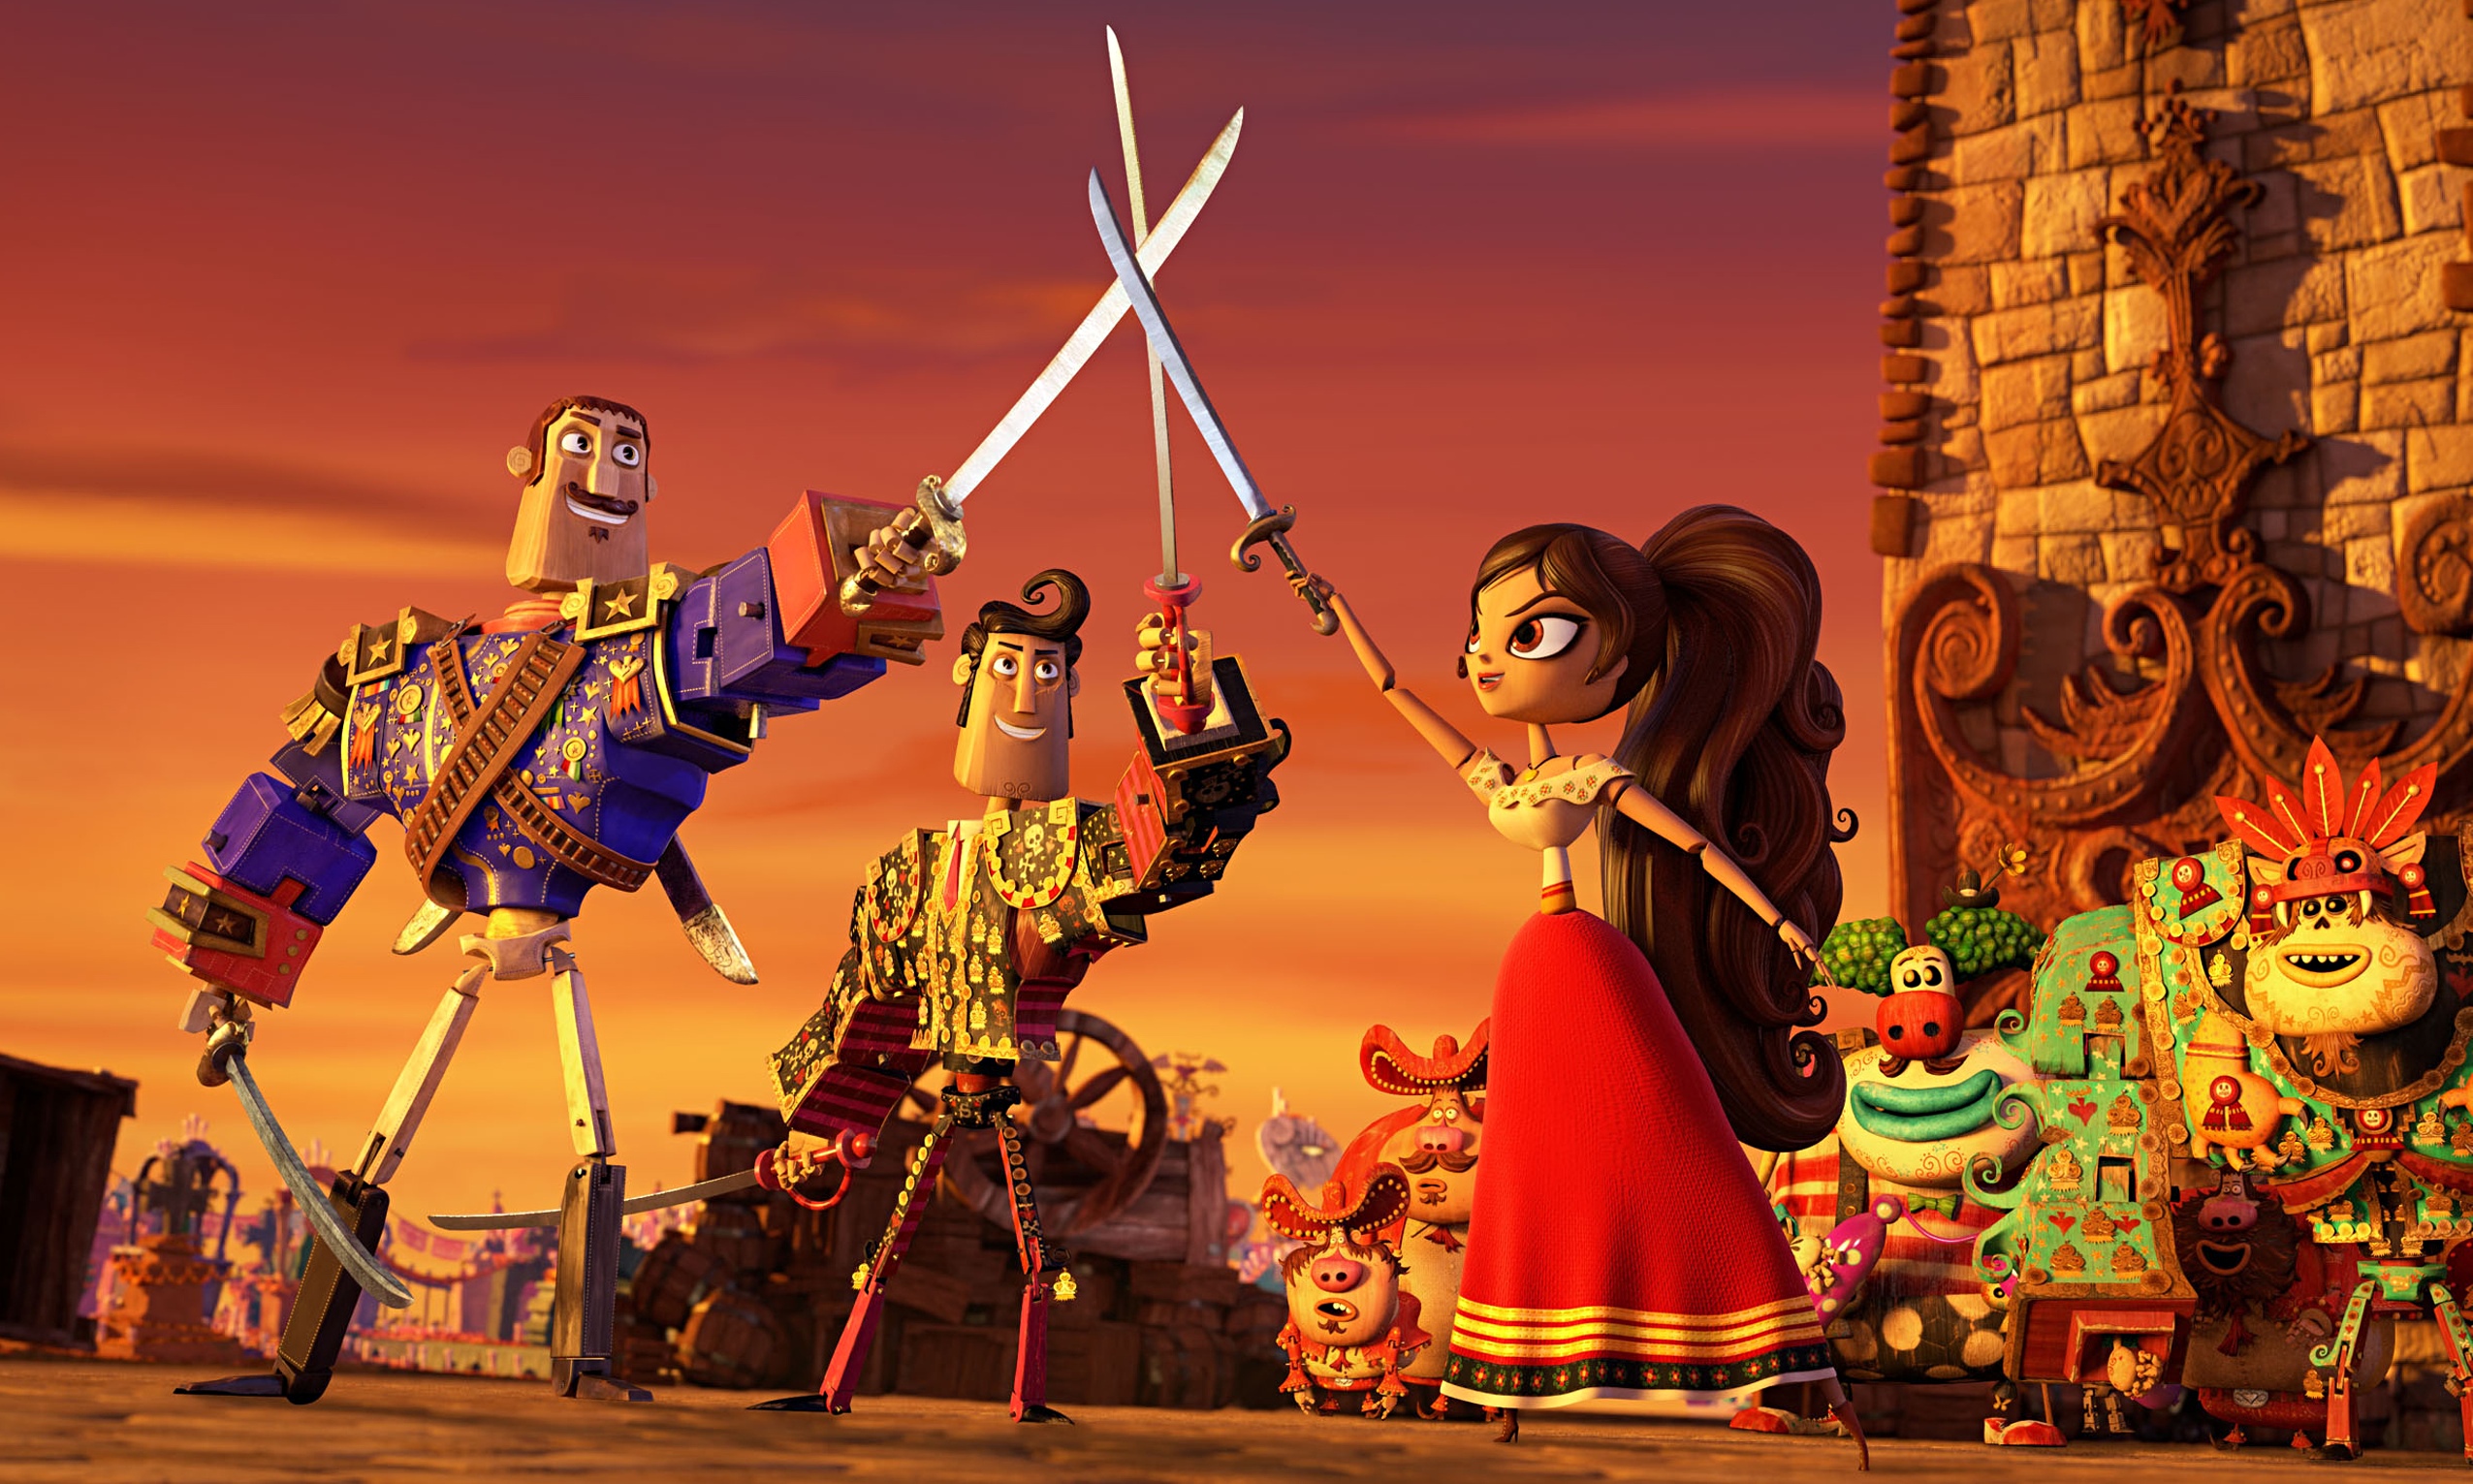 The Book of Life review – dazzling 3D effects outshine a story of love | Film | The Guardian